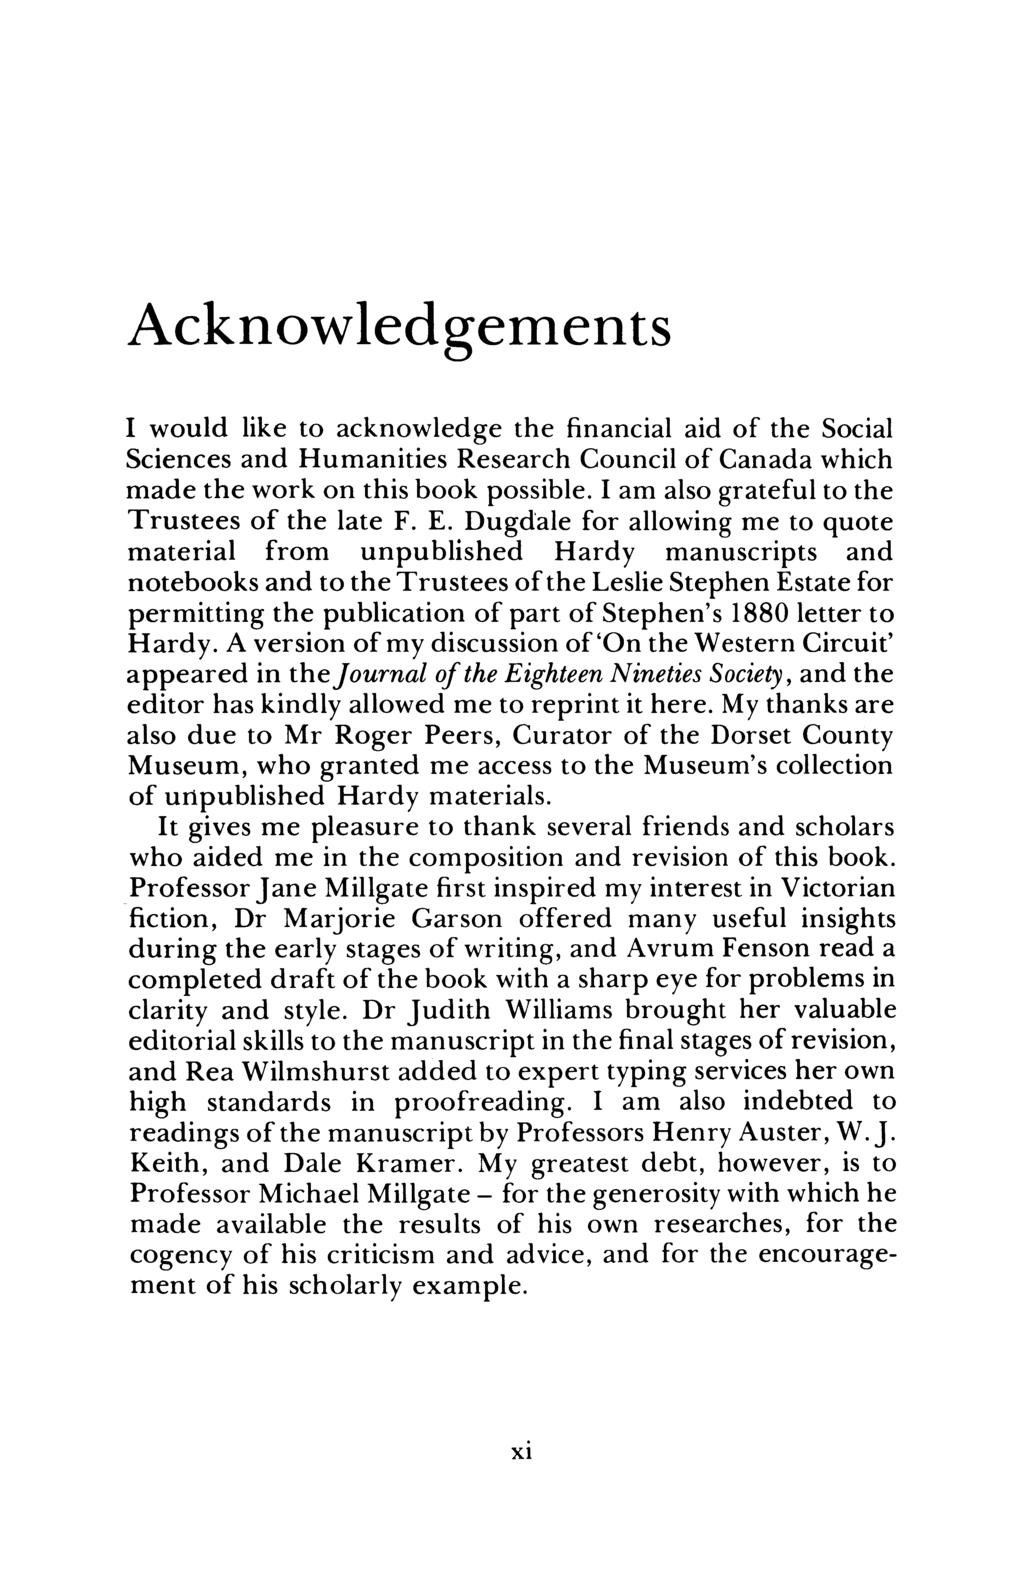 Acknowledgements I would like to acknowledge the financial aid of the Social Sciences and Humanities Research Council of Canada which made the work on this book possible.